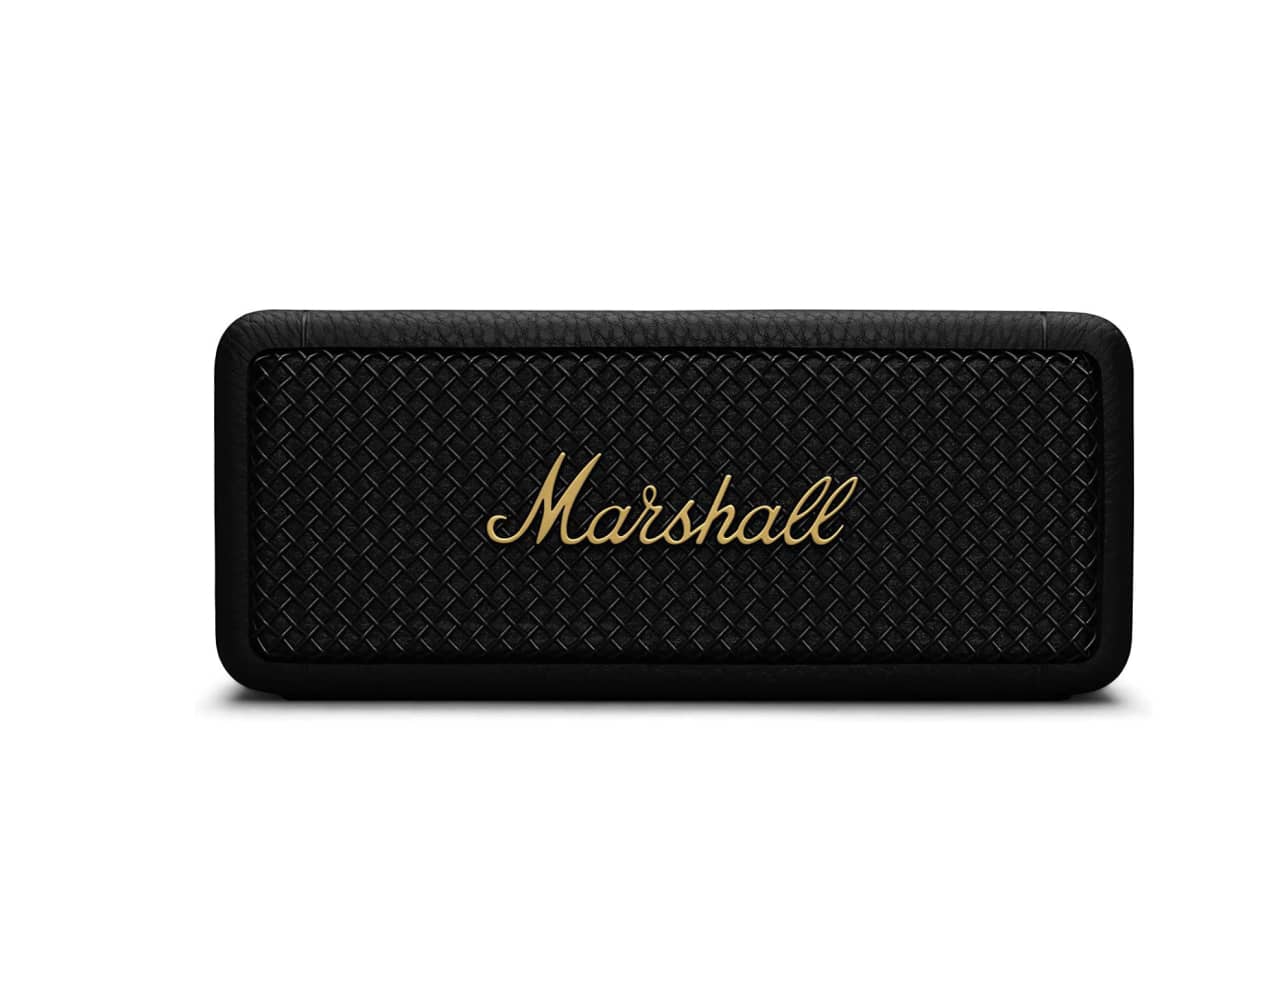 Rock on: Get a Marshall Woburn II Bluetooth speaker for $400 - CNET